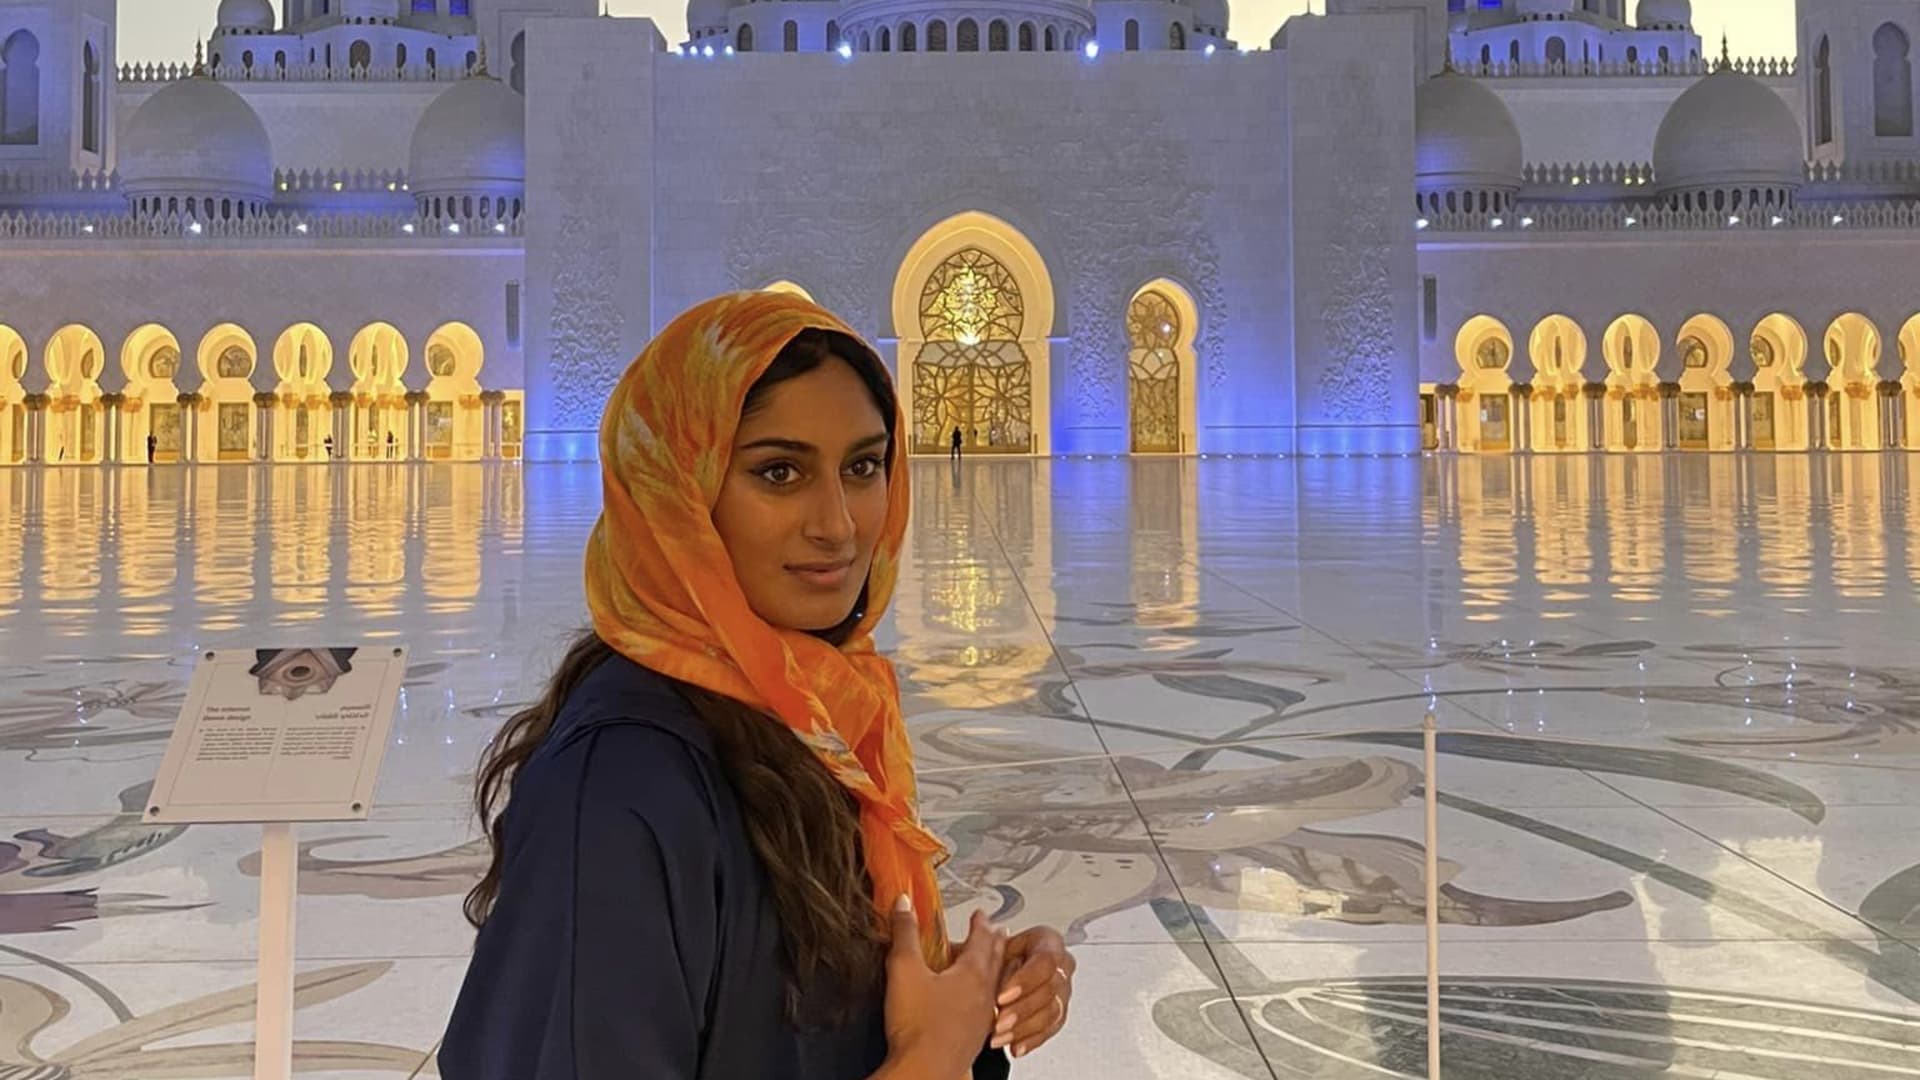 Nabila Ismail during a recent trip to the Grand Mosque in Abu Dhabi, UAE